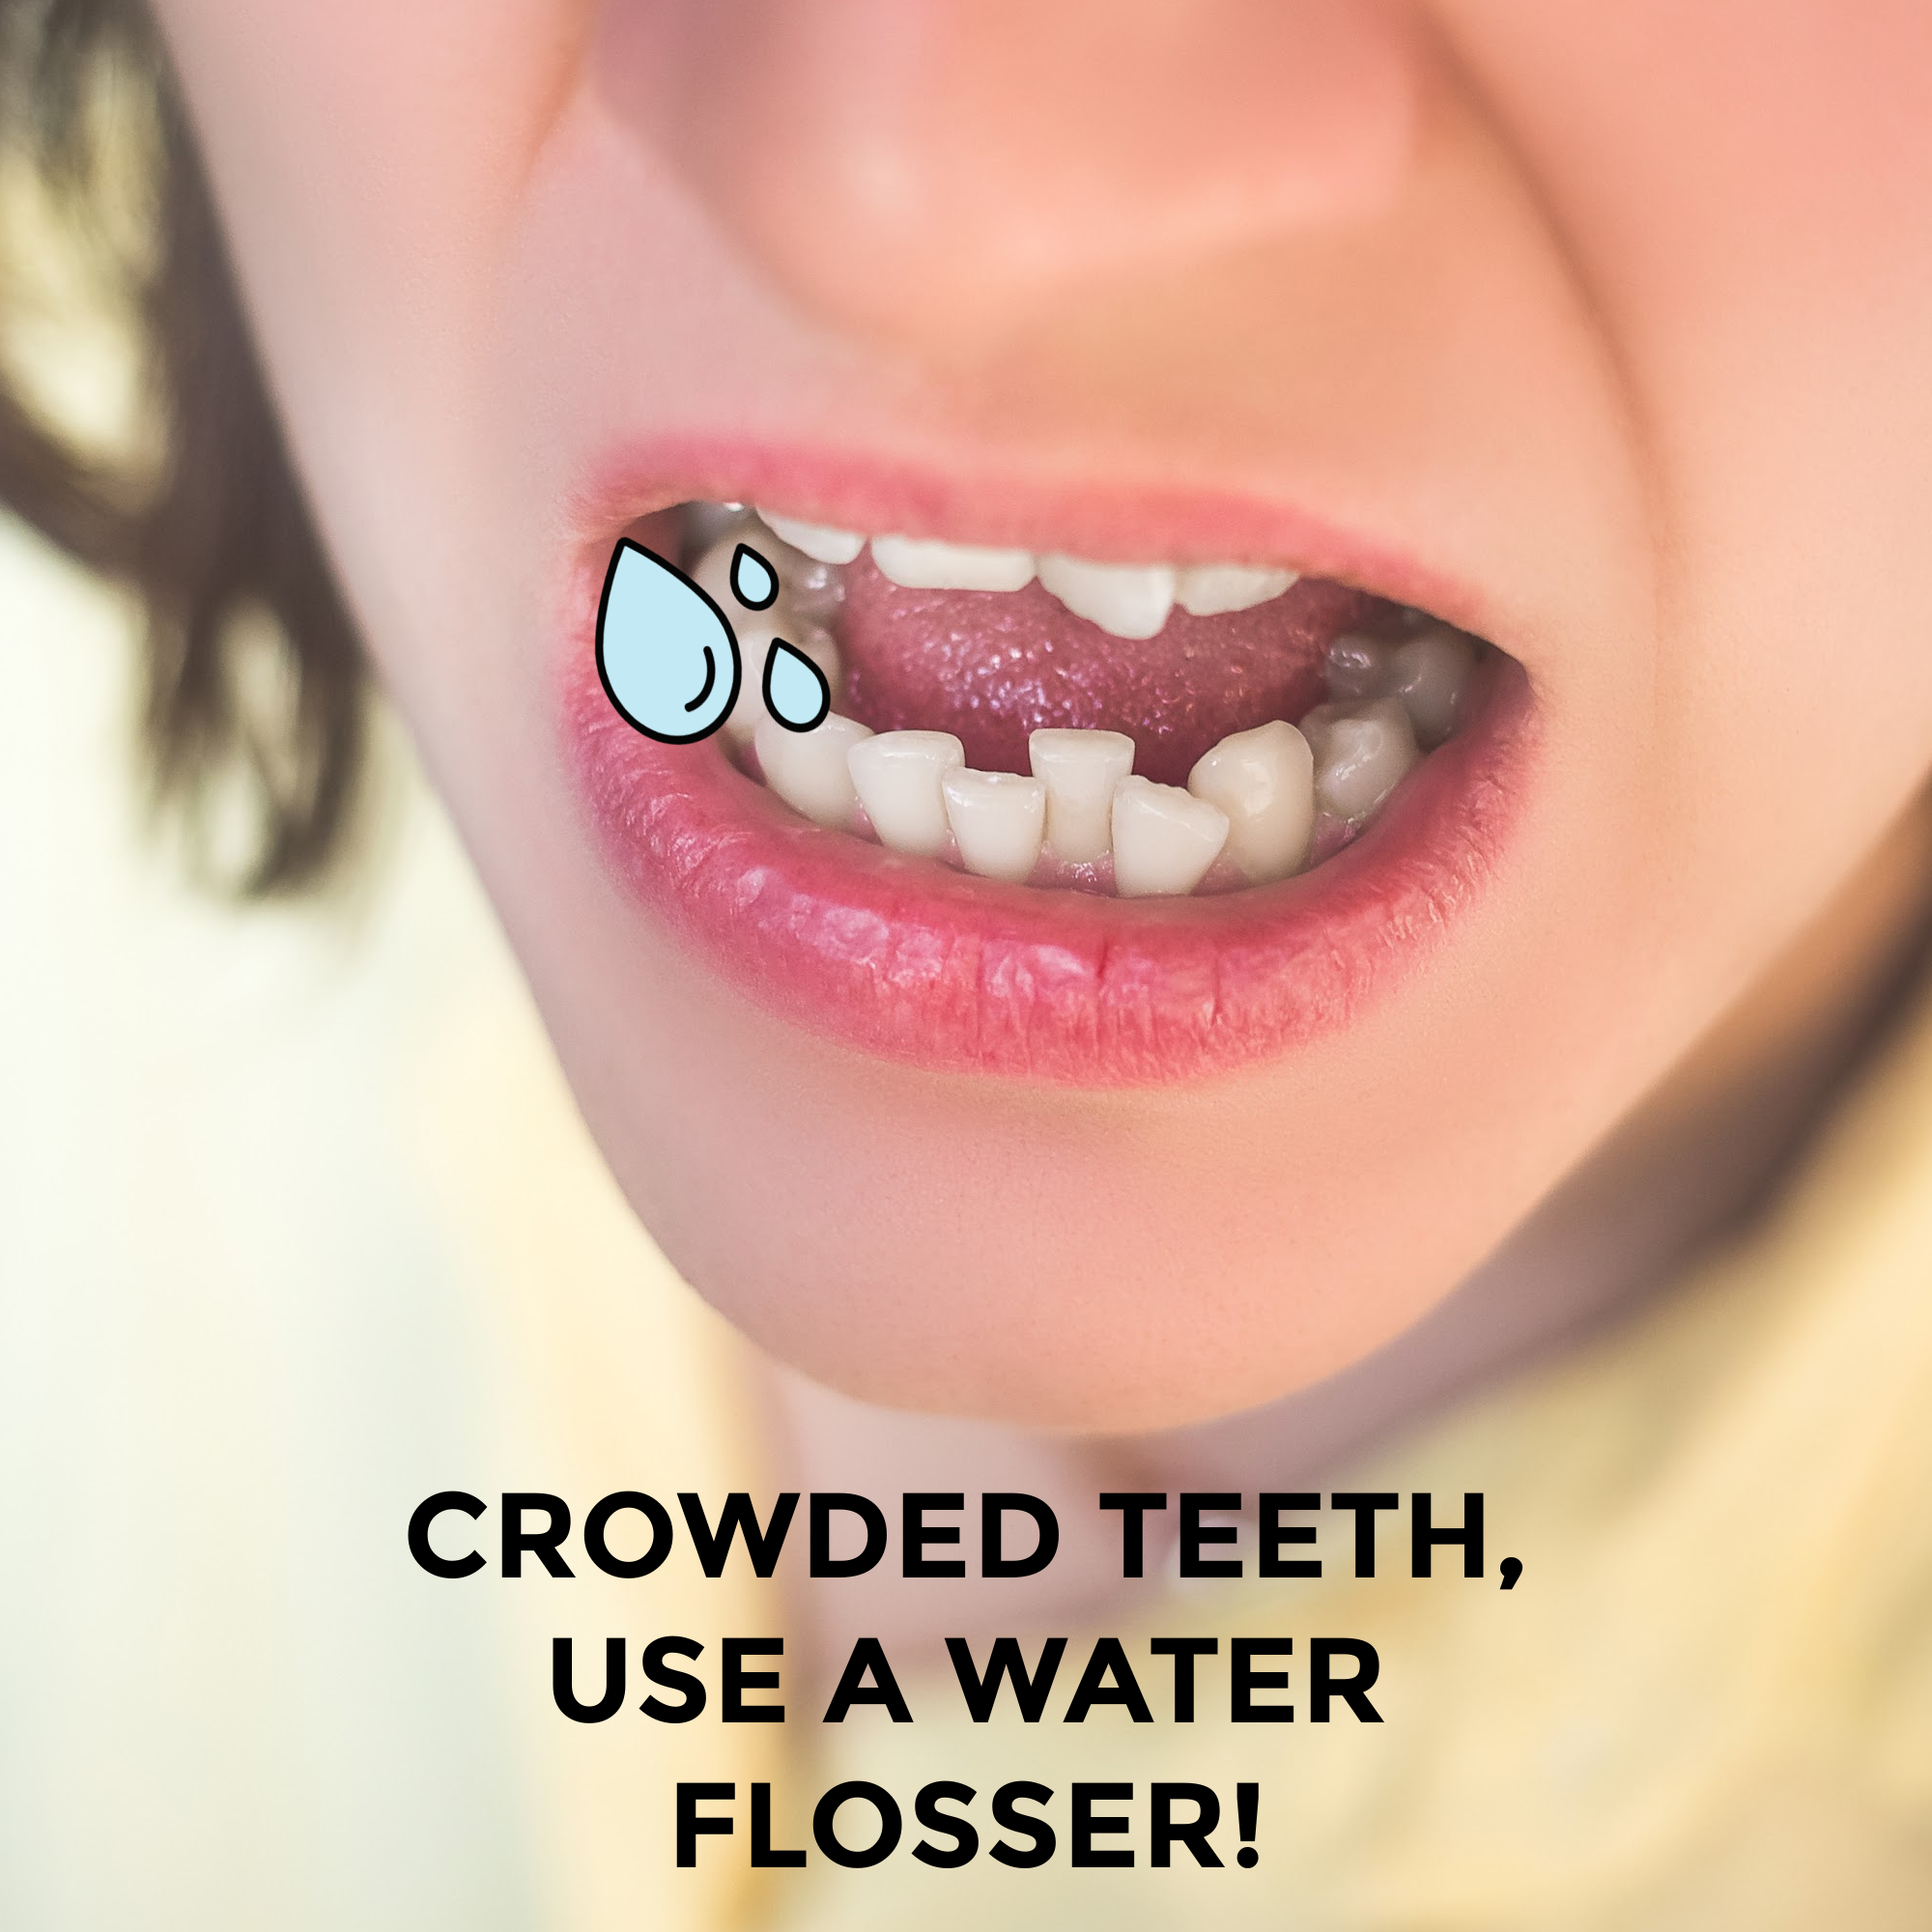 Shower flosser for crowded teeth as a flossing alternative